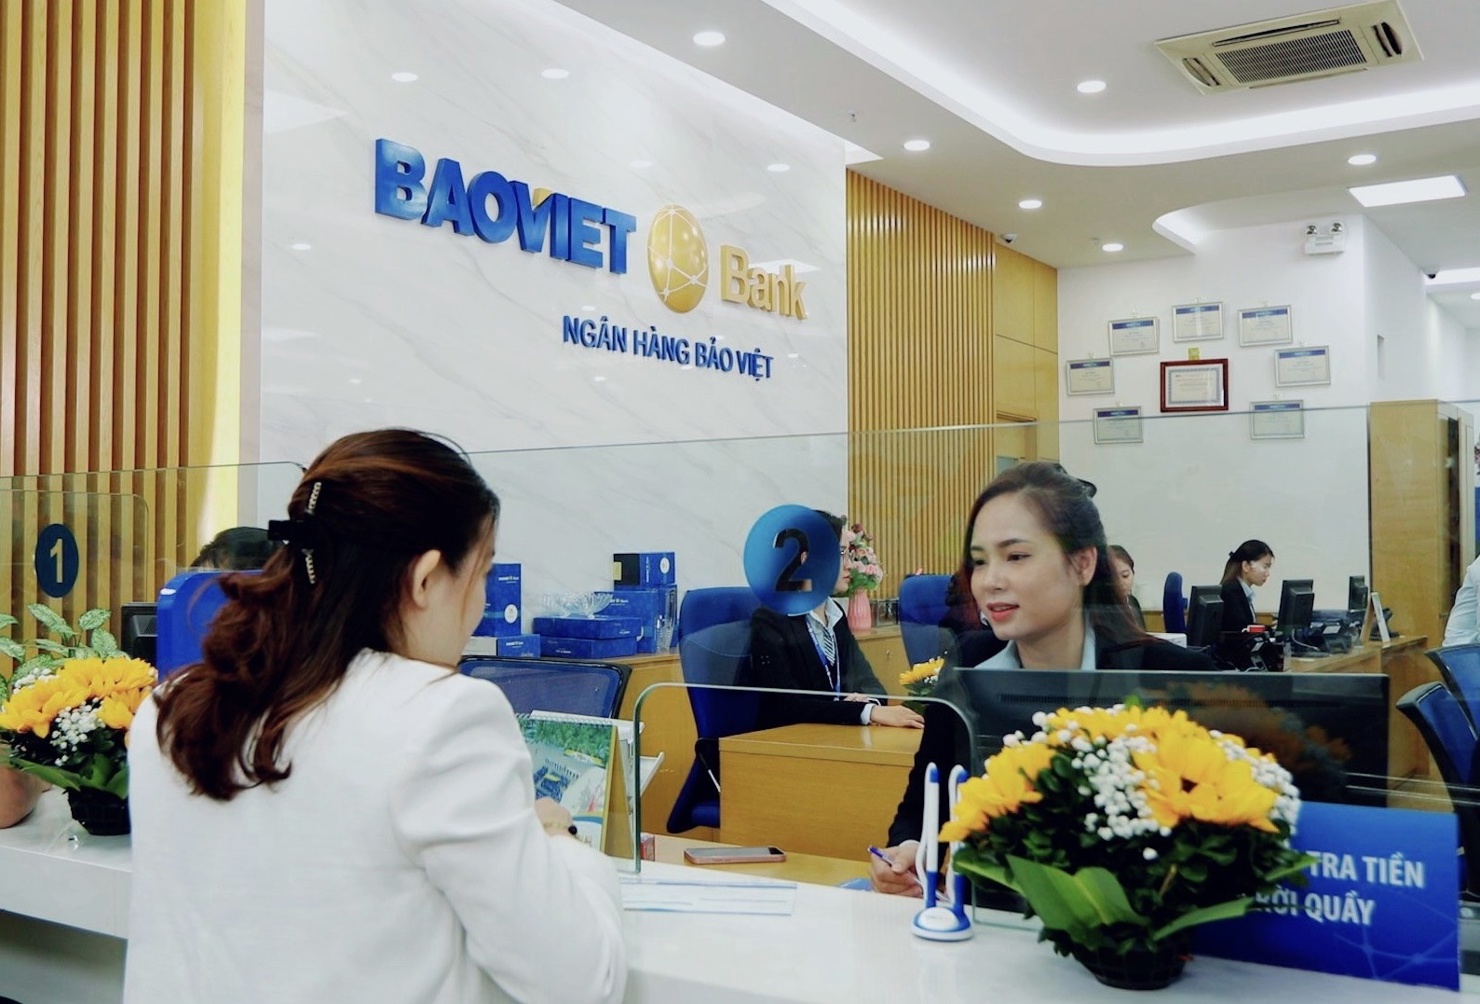 Kh&aacute;ch h&agrave;ng giao dịch tại BAOVIET Bank Chi nh&aacute;nh Sở Giao dịch.